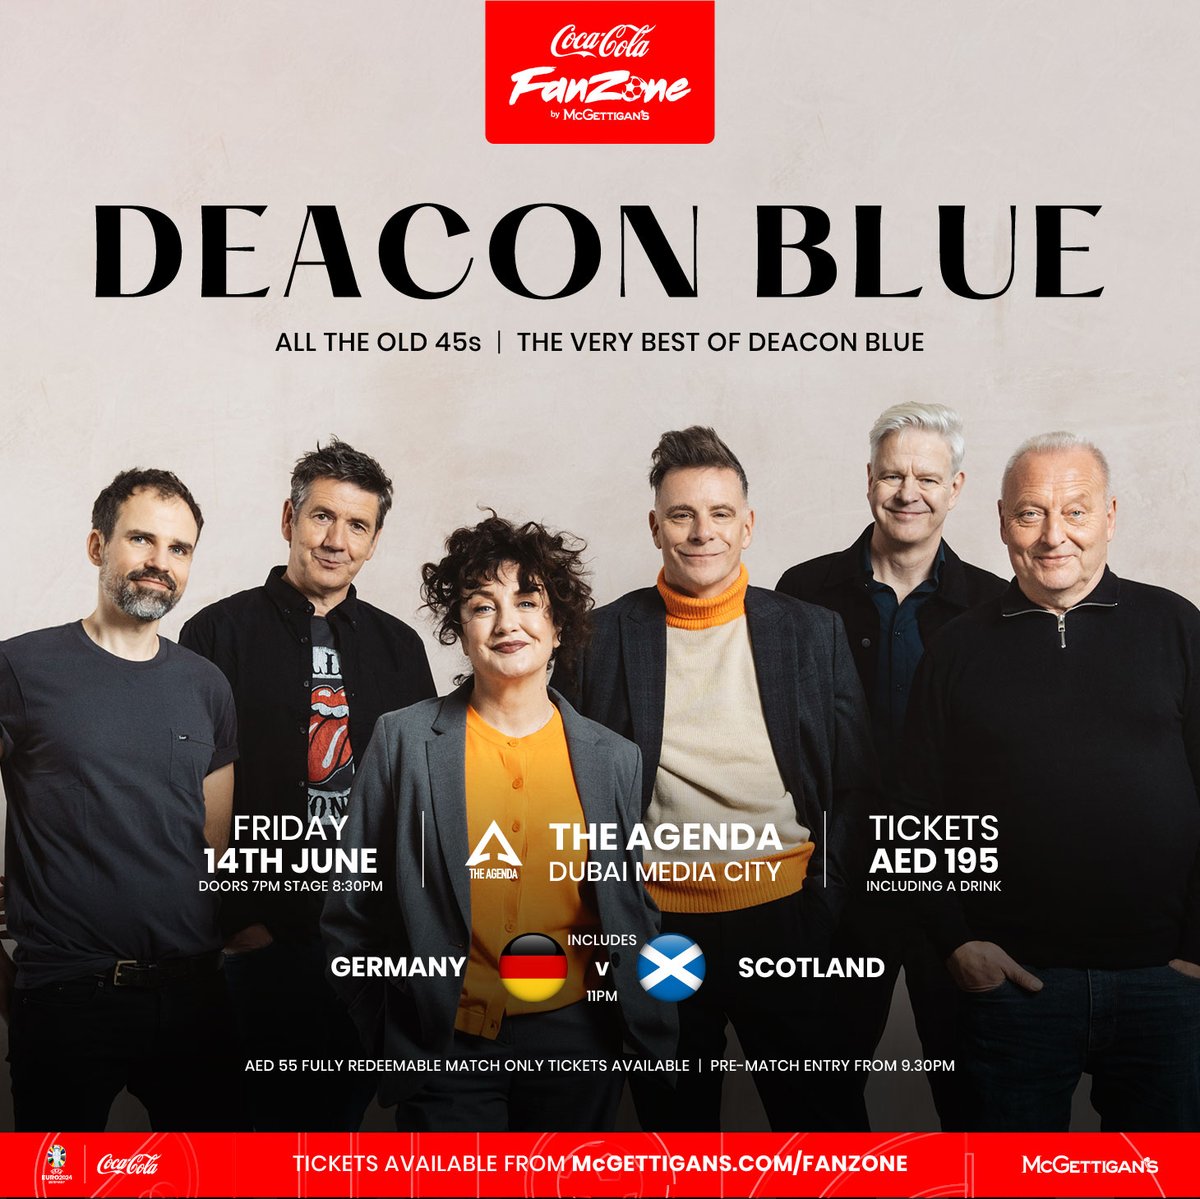 We’re excited to announce we’re coming back to Dubai! We’re playing The Agenda, Dubai Media City on Friday 14th June and tickets are on sale now here: mcgettigans.com/deaconblue And straight after the show, you can watch Scotland’s opening Euro 2024 match against Germany!